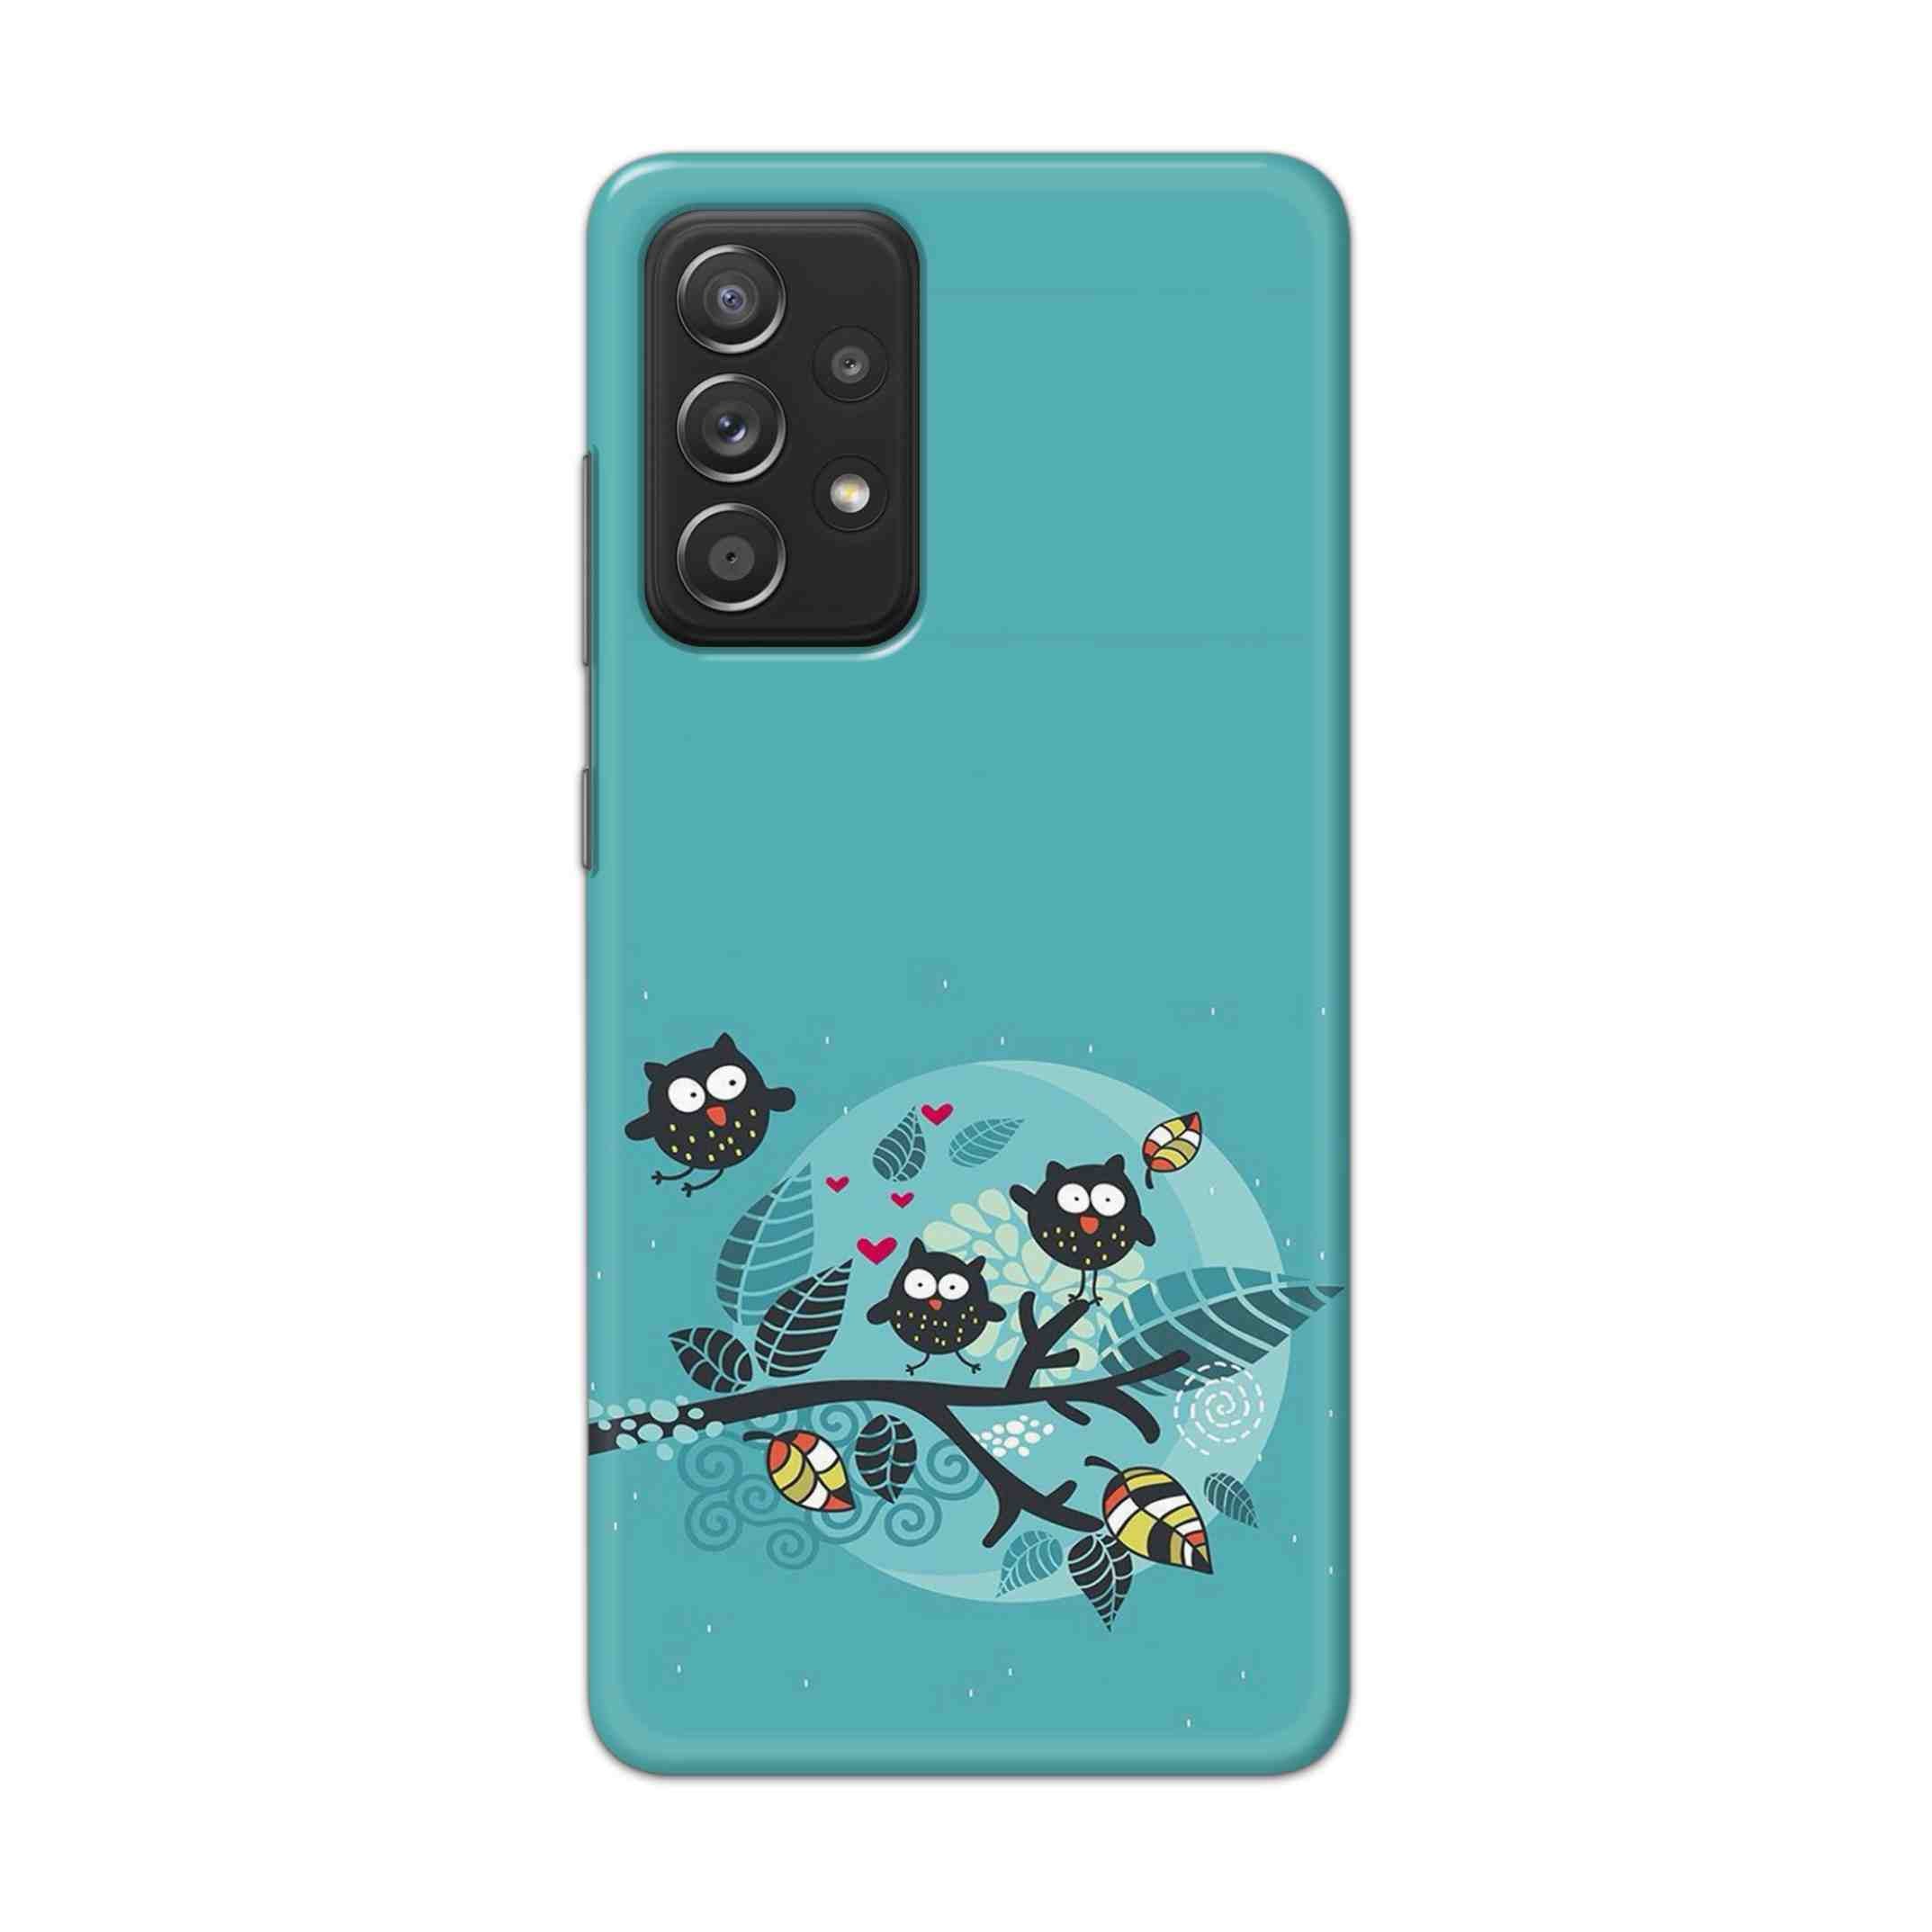 Buy Owl Hard Back Mobile Phone Case Cover For Samsung Galaxy A52 Online